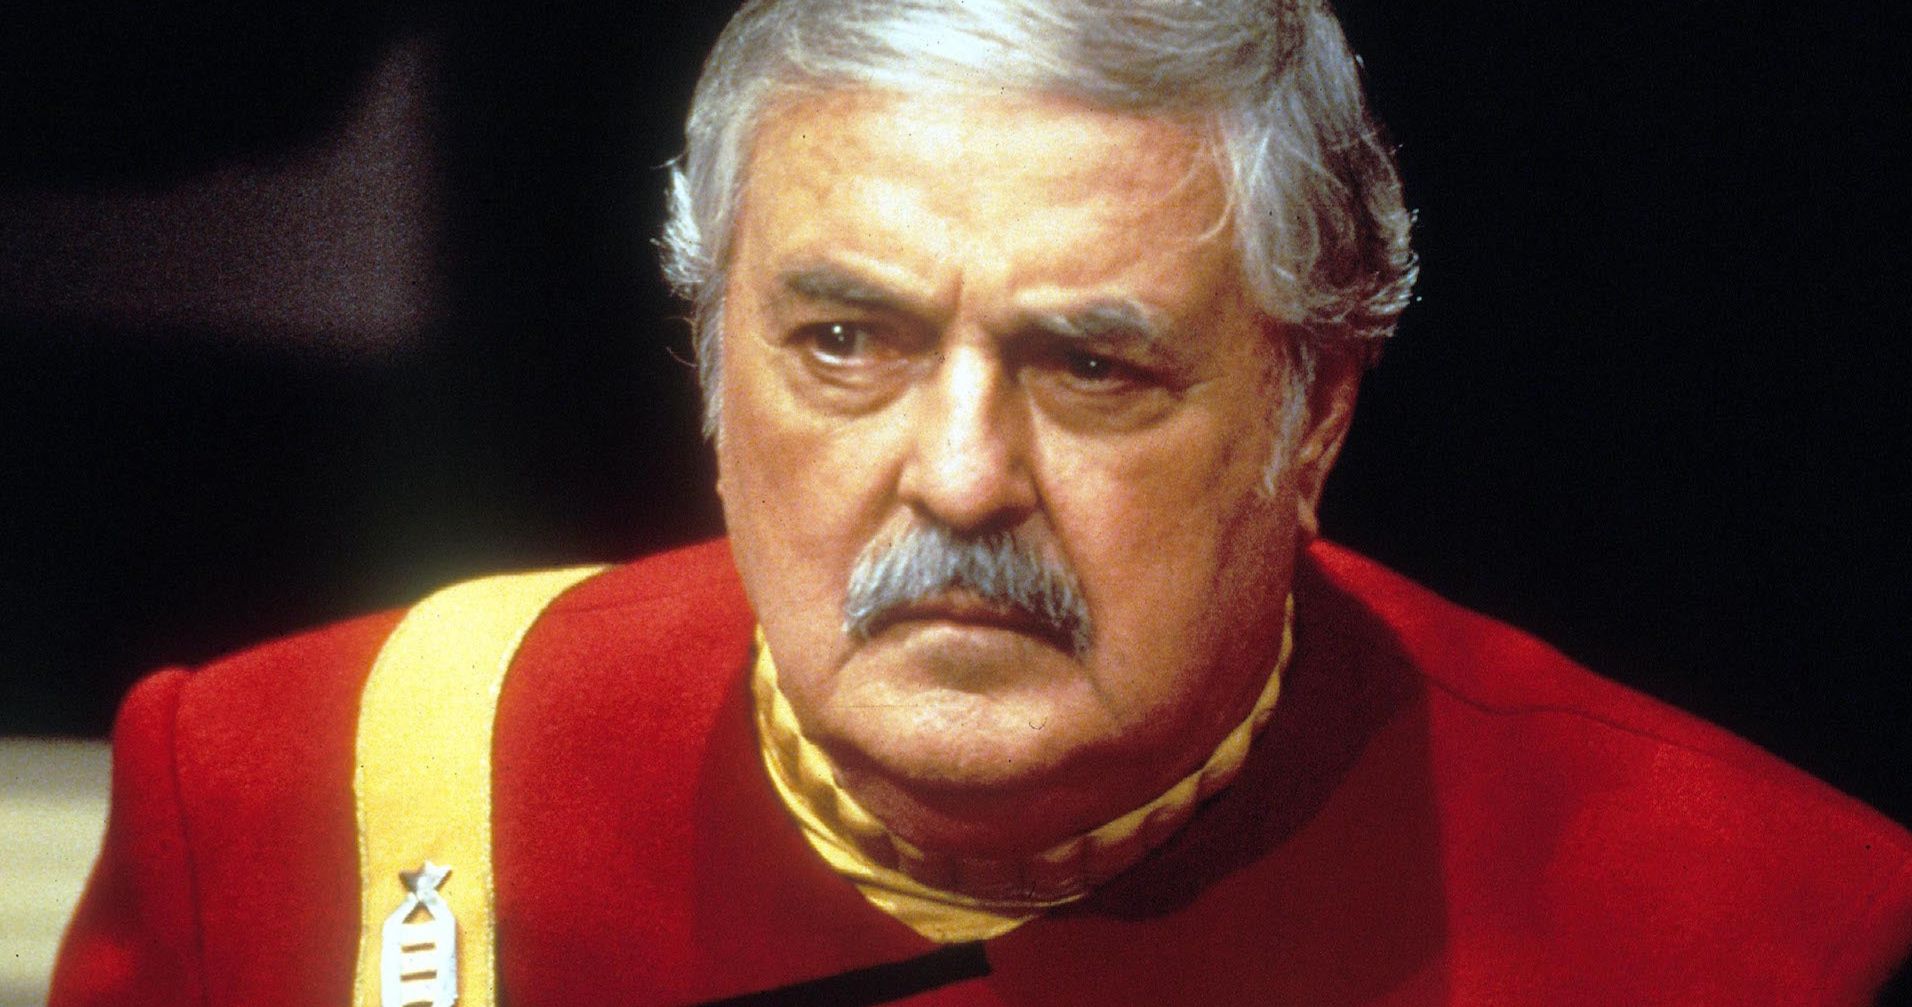 Star Trek Icon James Doohan's Ashes Were Snuck Onboard the International Space Station